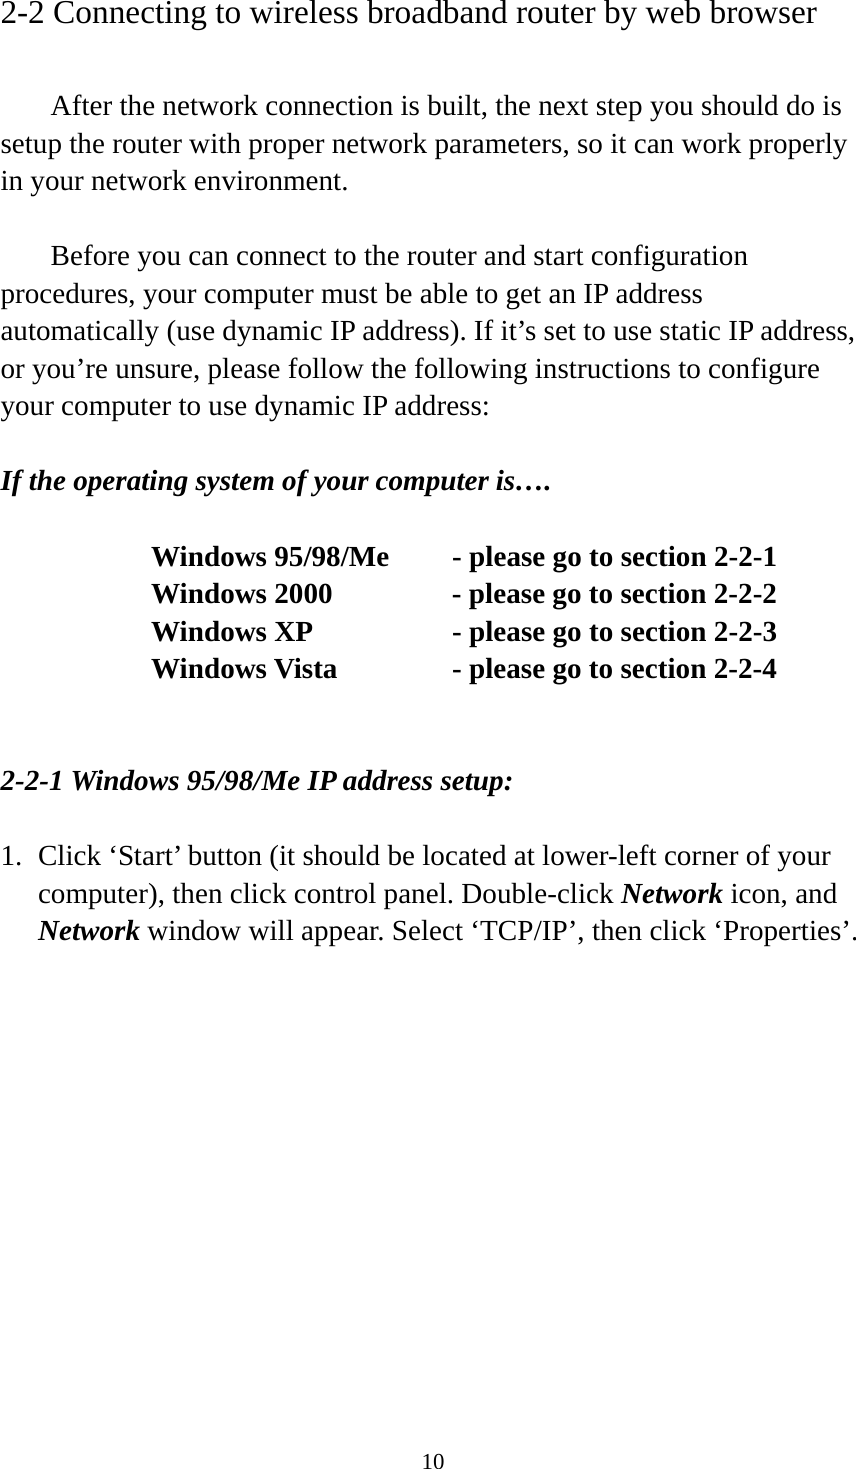 10 2-2 Connecting to wireless broadband router by web browser    After the network connection is built, the next step you should do is setup the router with proper network parameters, so it can work properly in your network environment.    Before you can connect to the router and start configuration procedures, your computer must be able to get an IP address automatically (use dynamic IP address). If it’s set to use static IP address, or you’re unsure, please follow the following instructions to configure your computer to use dynamic IP address:  If the operating system of your computer is….     Windows 95/98/Me    - please go to section 2-2-1       Windows 2000           - please go to section 2-2-2         Windows XP      - please go to section 2-2-3       Windows Vista      - please go to section 2-2-4   2-2-1 Windows 95/98/Me IP address setup:  1. Click ‘Start’ button (it should be located at lower-left corner of your computer), then click control panel. Double-click Network icon, and Network window will appear. Select ‘TCP/IP’, then click ‘Properties’.  